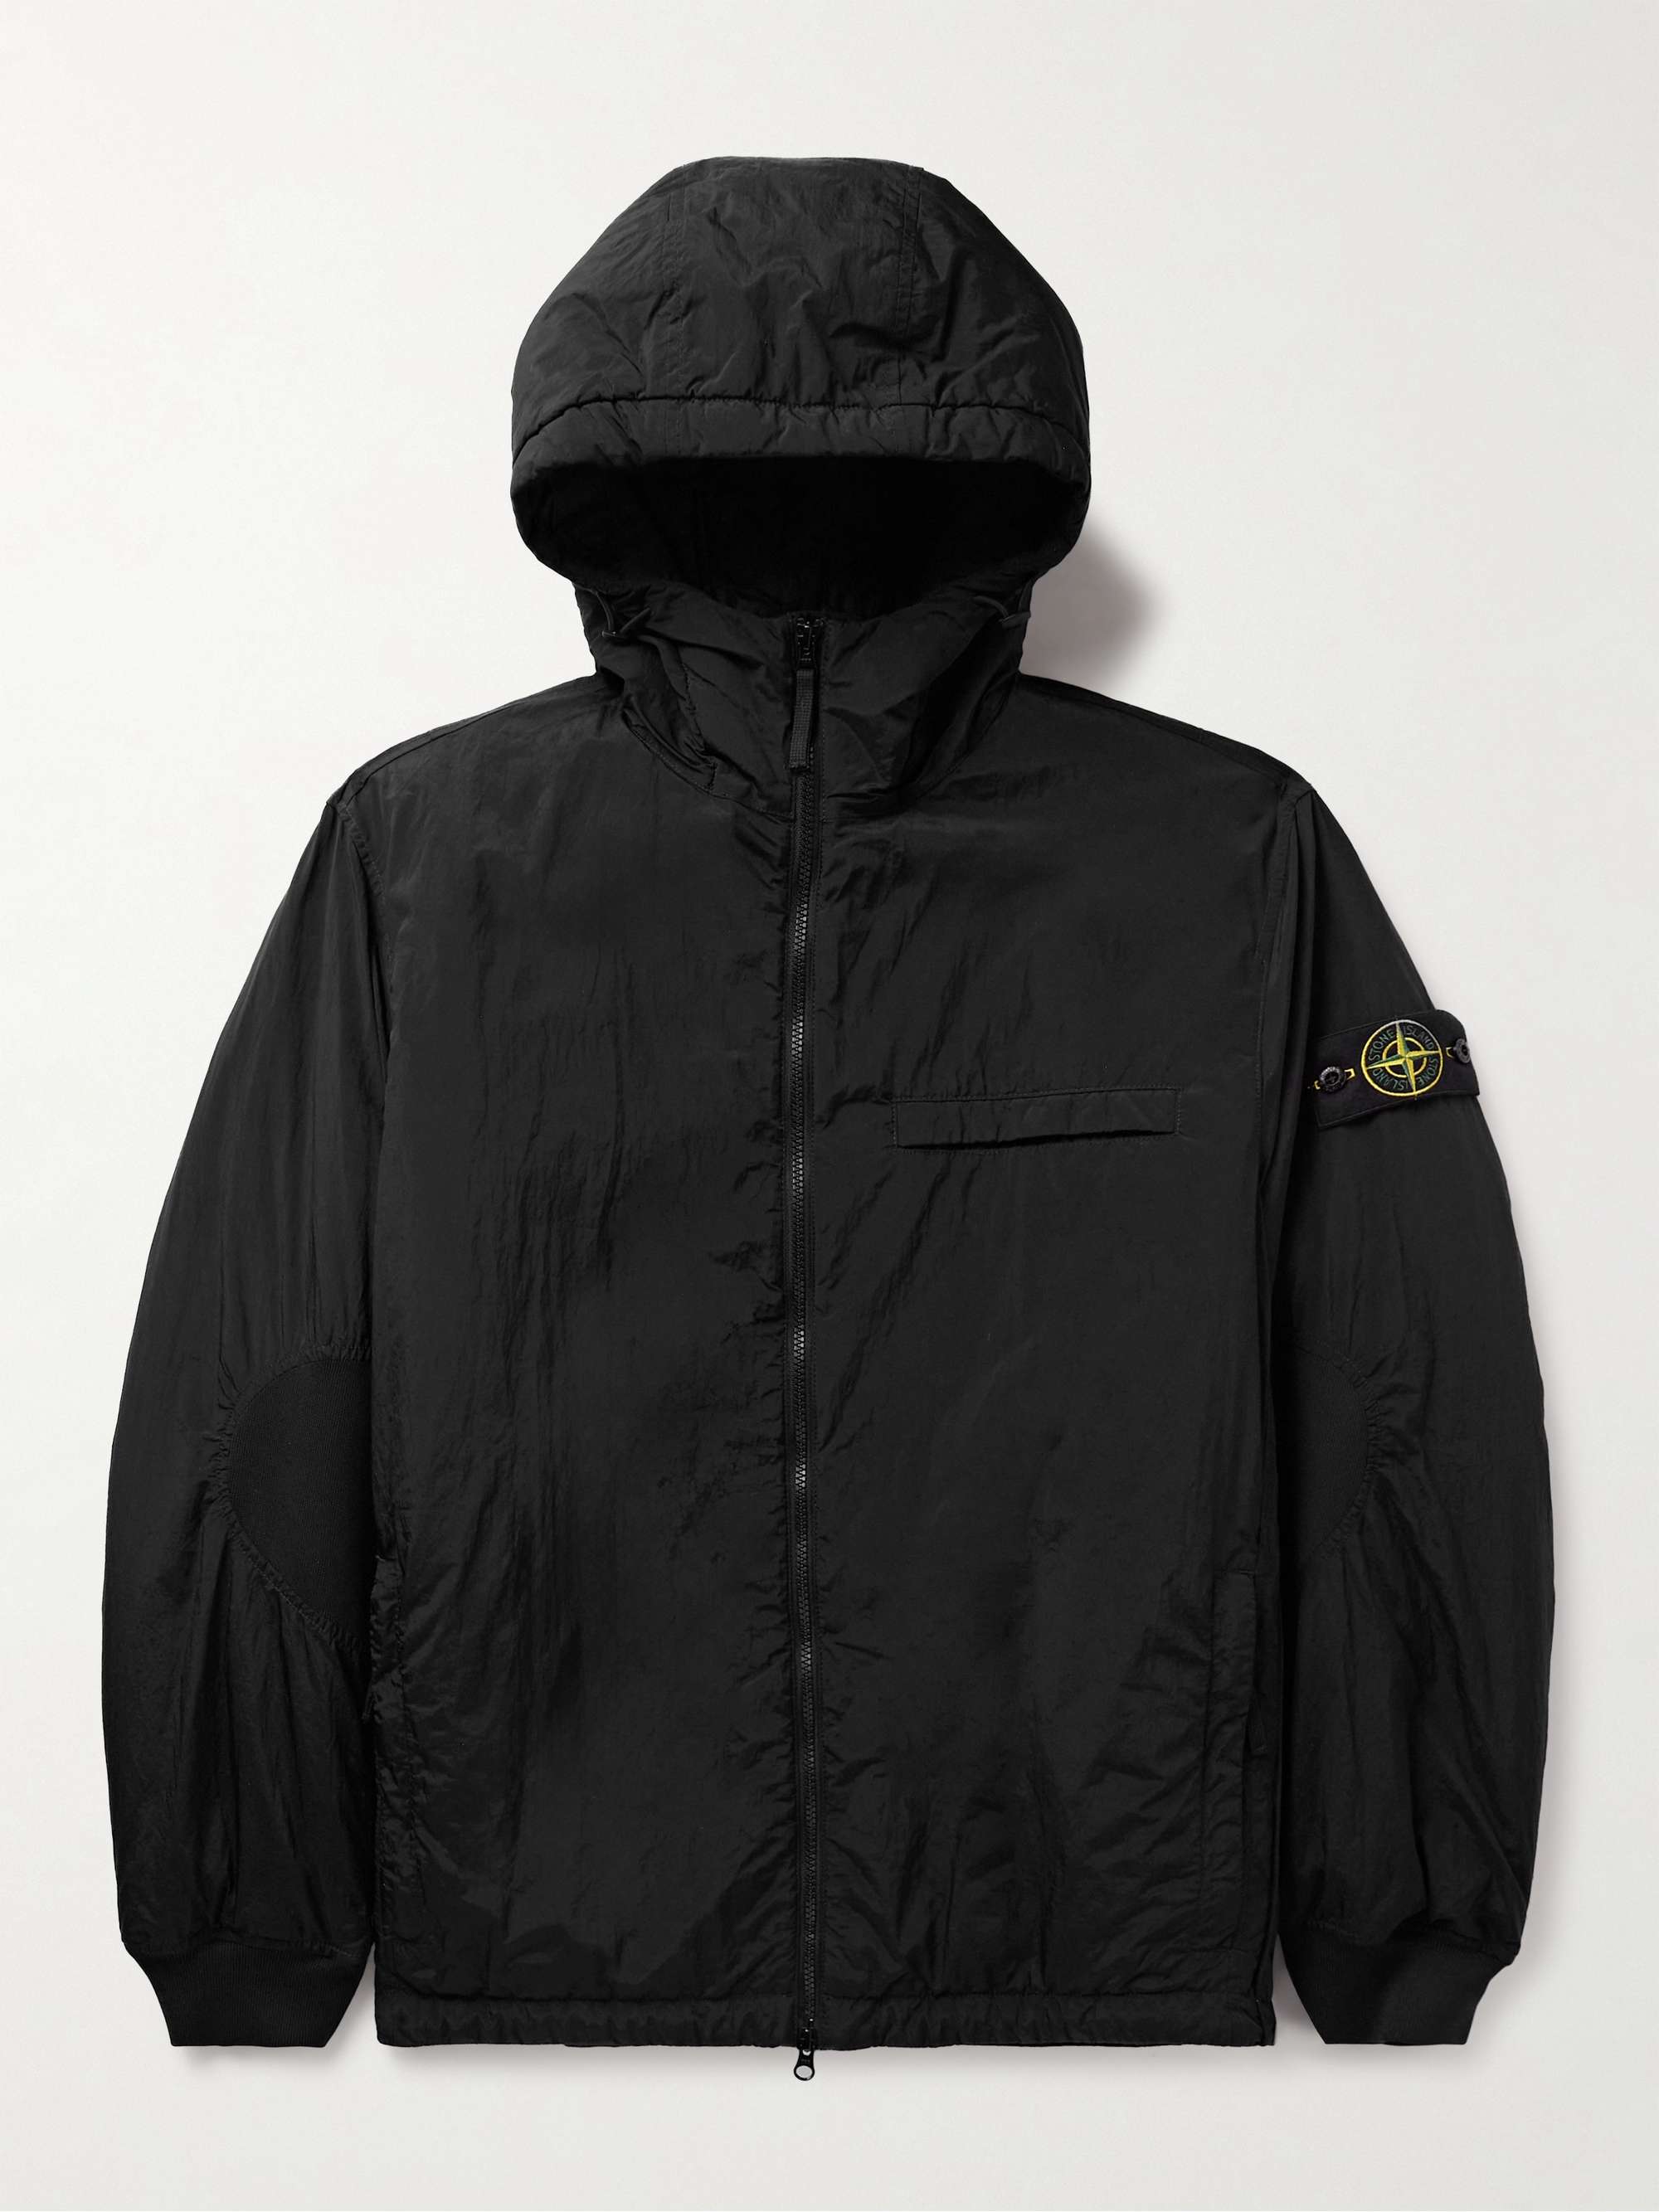 Mens Designer Stone Down Pocket Island Snow Jackets Men With Long Sleeves,  Zipper Badges, And Embroidered Detailing Casual Coat For Men From  Trapstar8, $104.17 | DHgate.Com